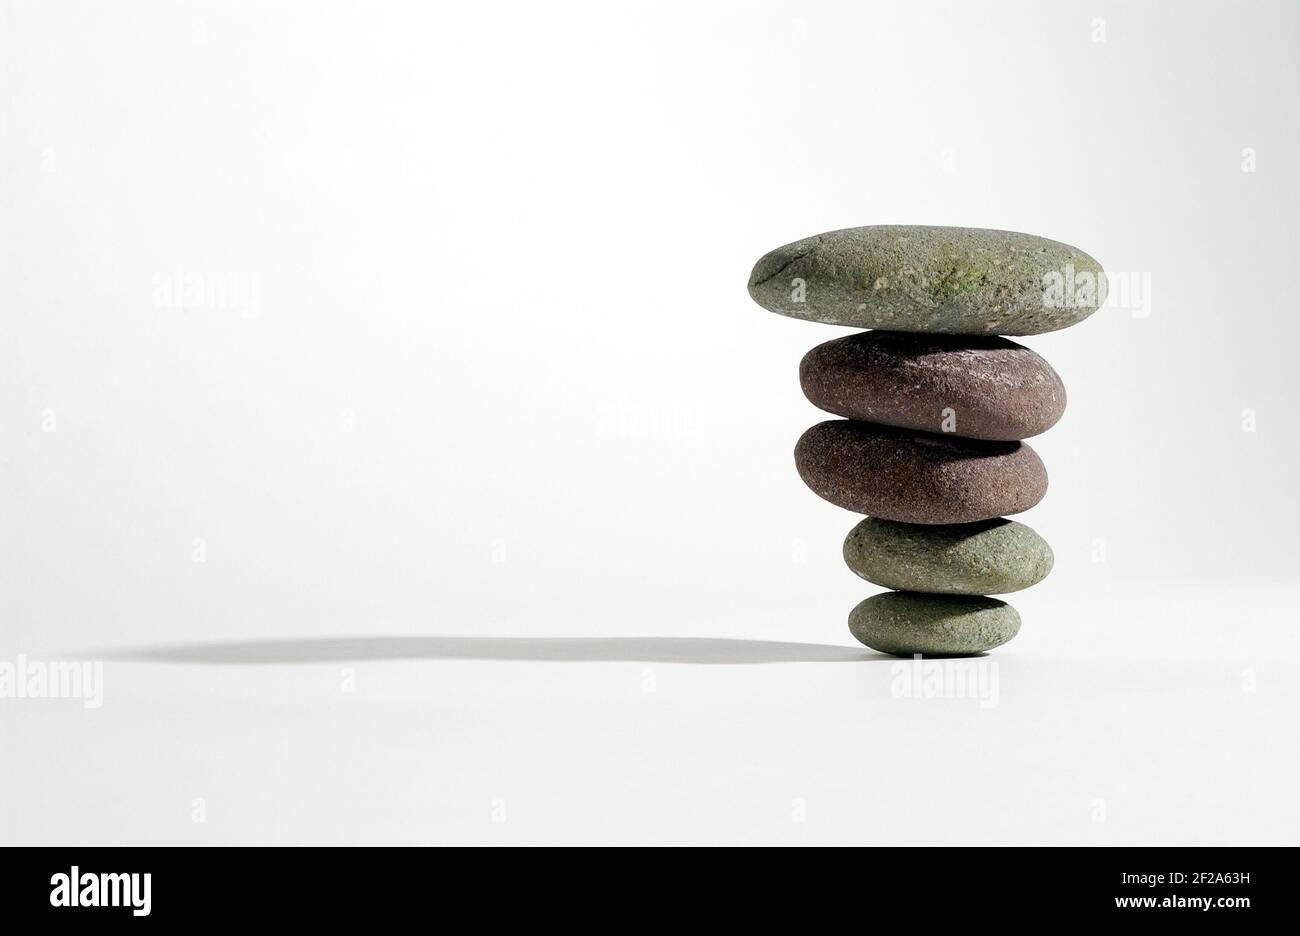 Stones balanced on one another against a white background Stock Photo